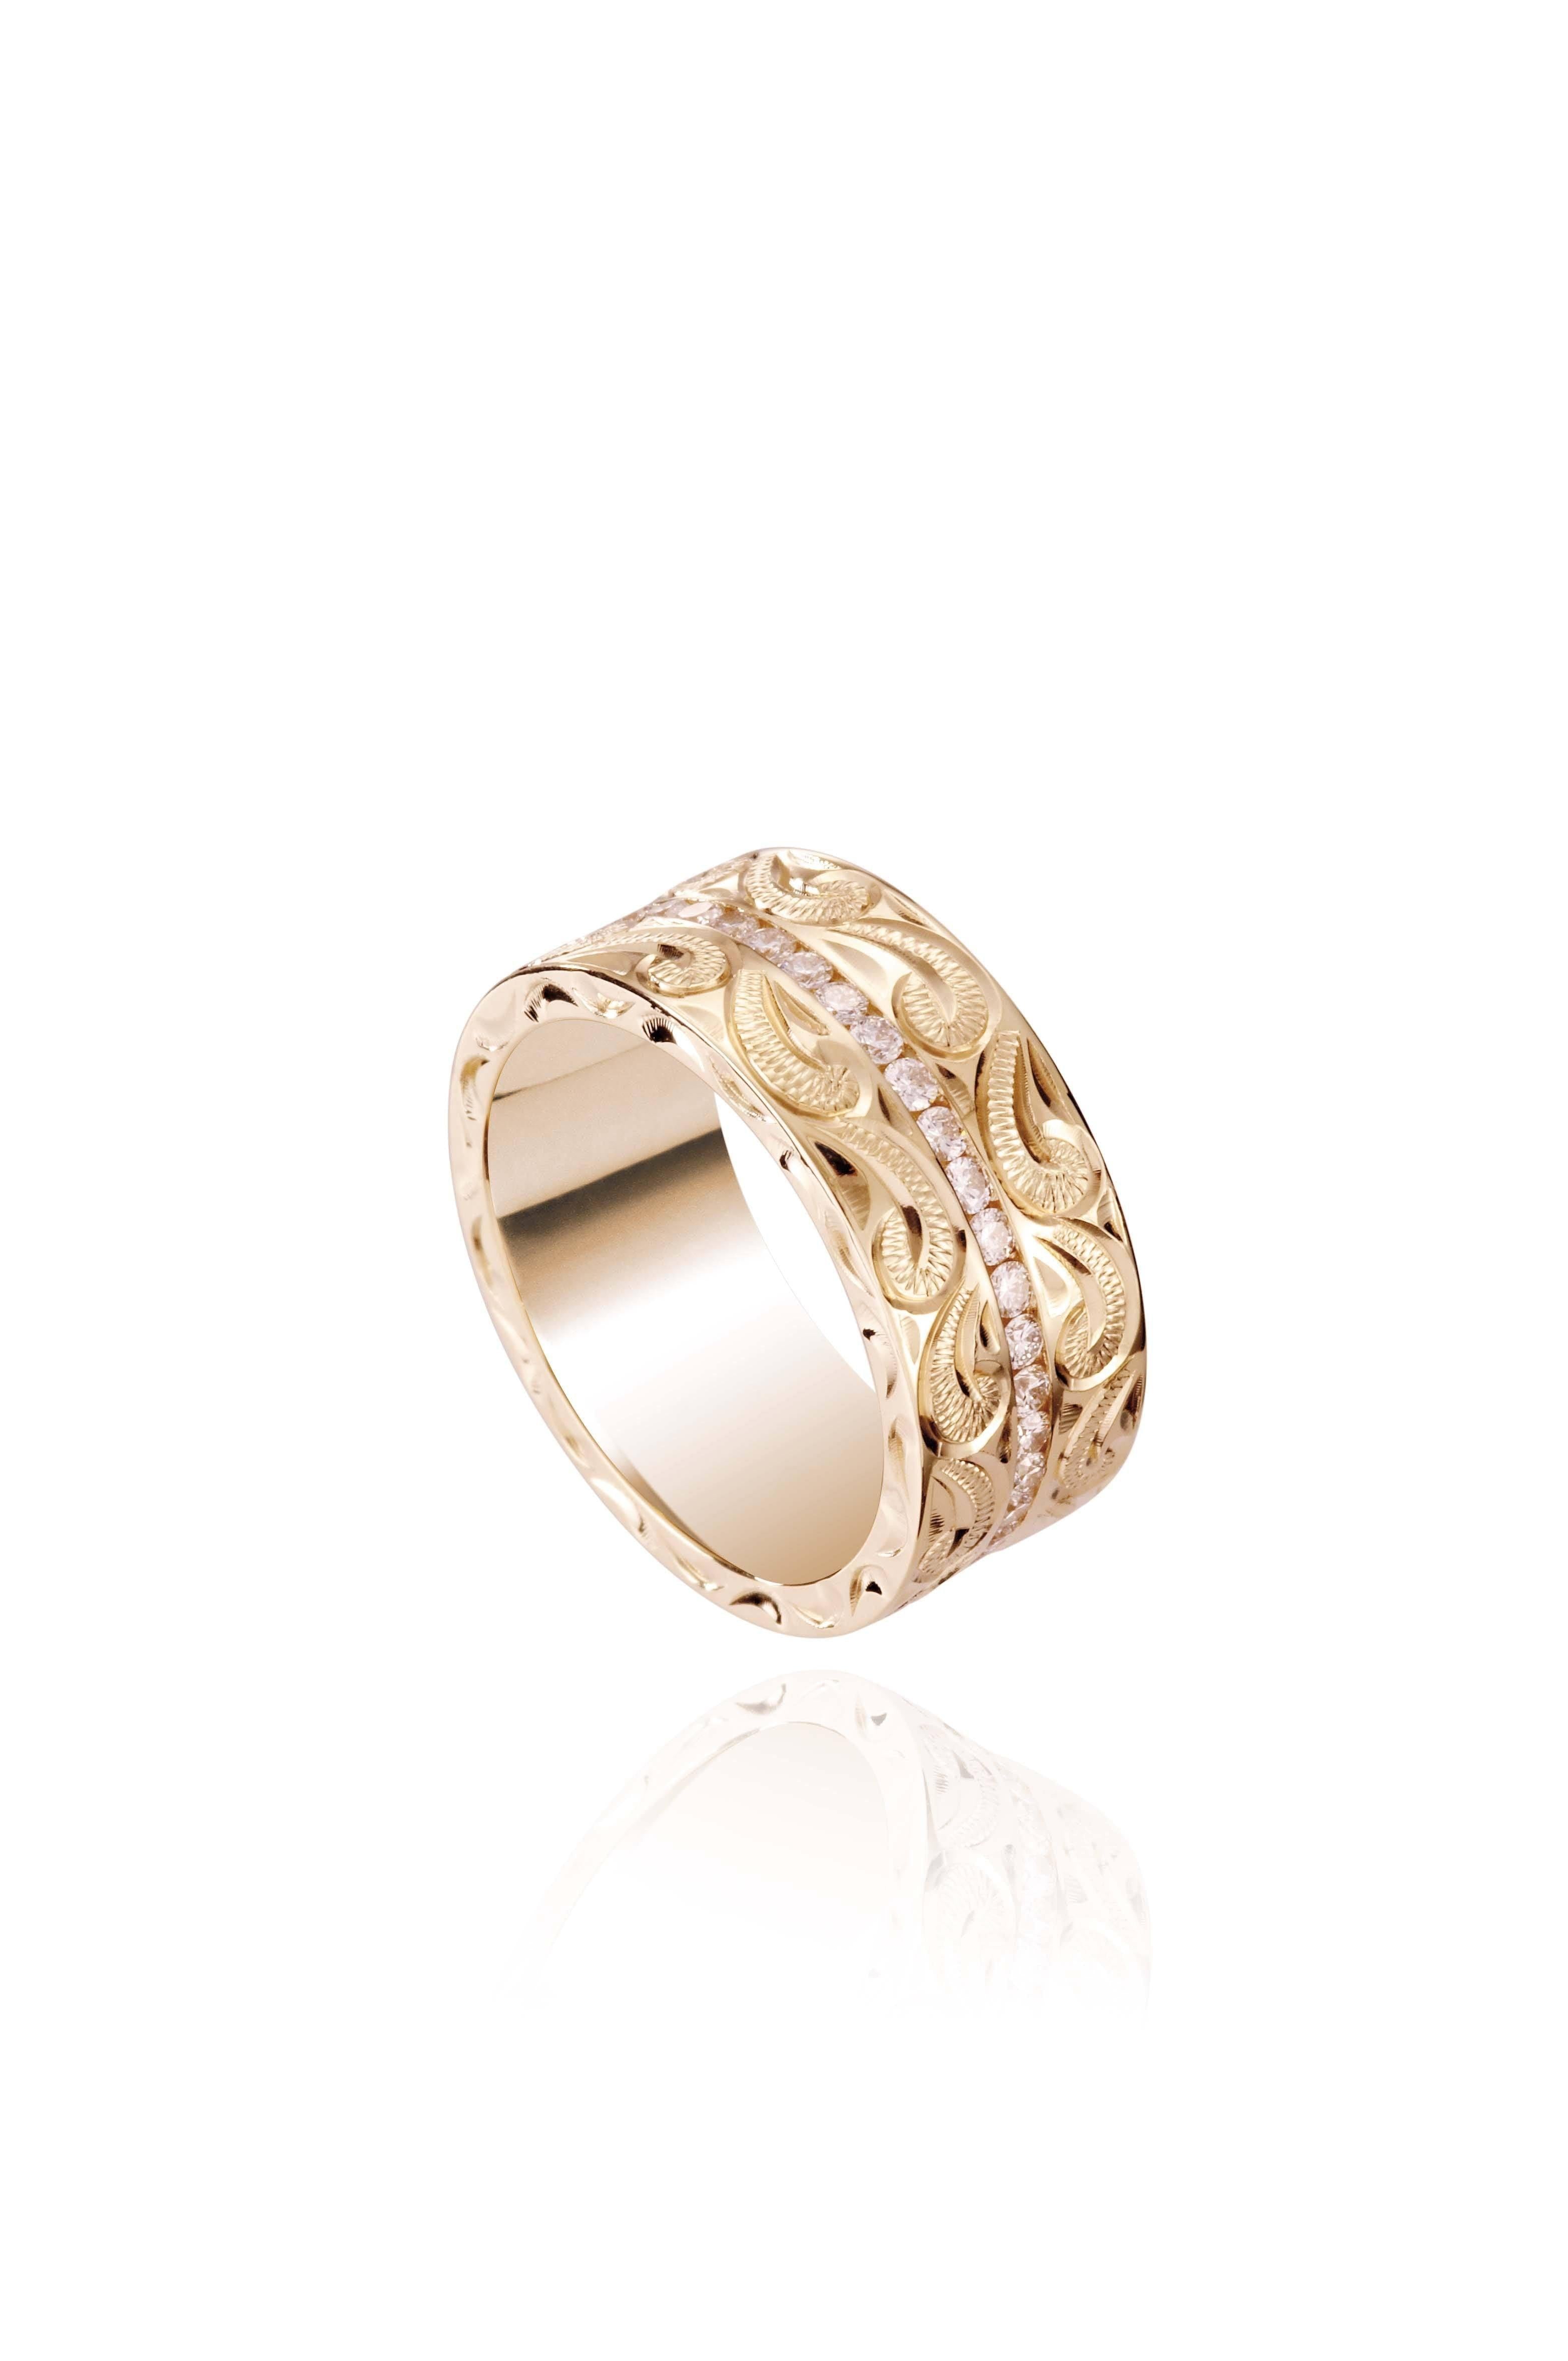 The picture shows a 14K yellow gold wave diamond channel 8mm ring with hand-engravings.